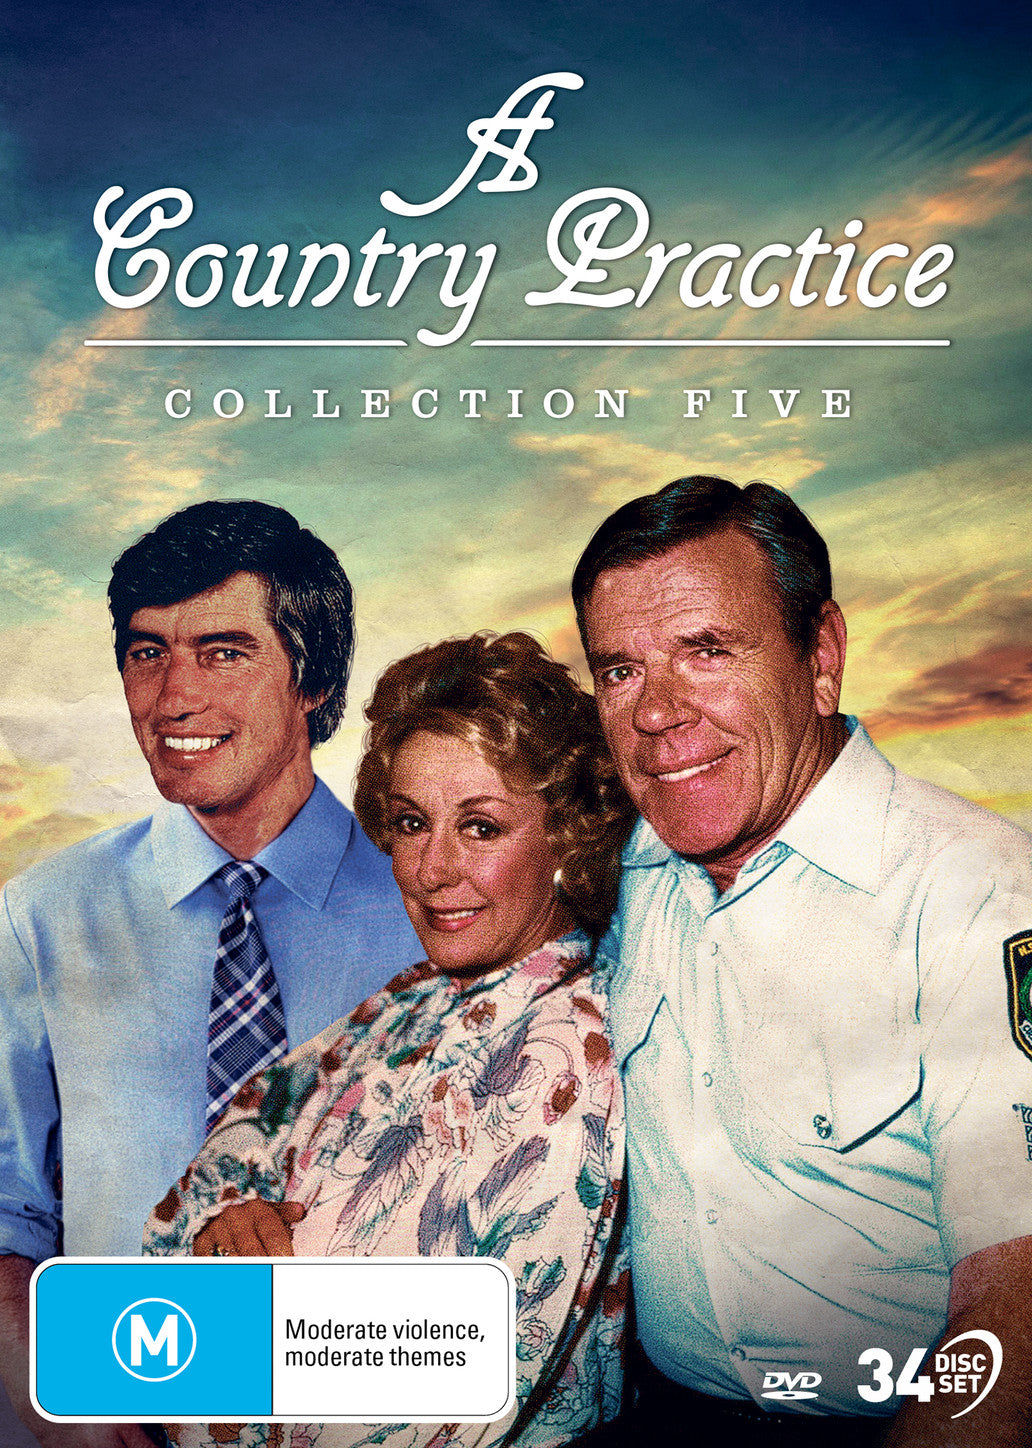 A COUNTRY PRACTICE - COLLECTION 5